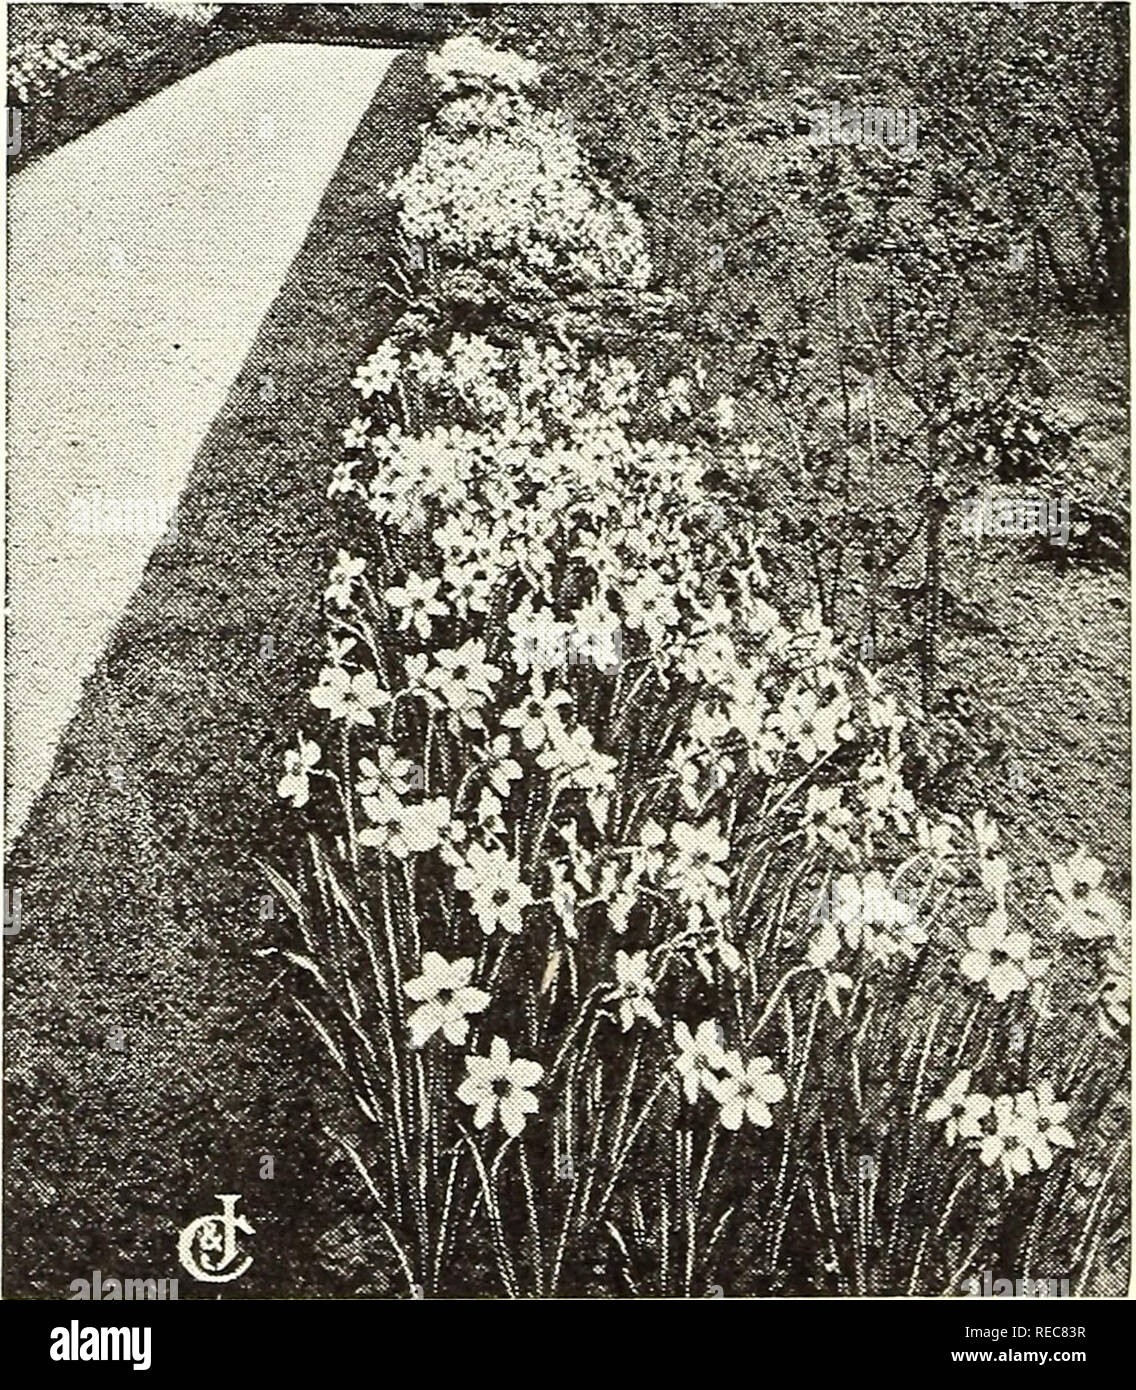 . Conard star roses : autumn 1923. Rose culture; Roses; Flowers Seeds Catalogs; Plants, Ornamental Seeds Catalogs. ANTOINE WINTZER. Vice-President Narcissi (Daffodils) Among the earliest to bloom of all our brilliant spring flowers. There are three different forms of Narcissi, or Daffodils, in the list below. Those marked L have long trumpets like the one shown in the illus- tration; the one followed by M has -a medium trumpet as it is a cross between the Giant Trumpet and the Poet's Narcis- sus; the one marked S has a small cup and broad white perianth. Our Bulbs are the largest grown â all a Stock Photo